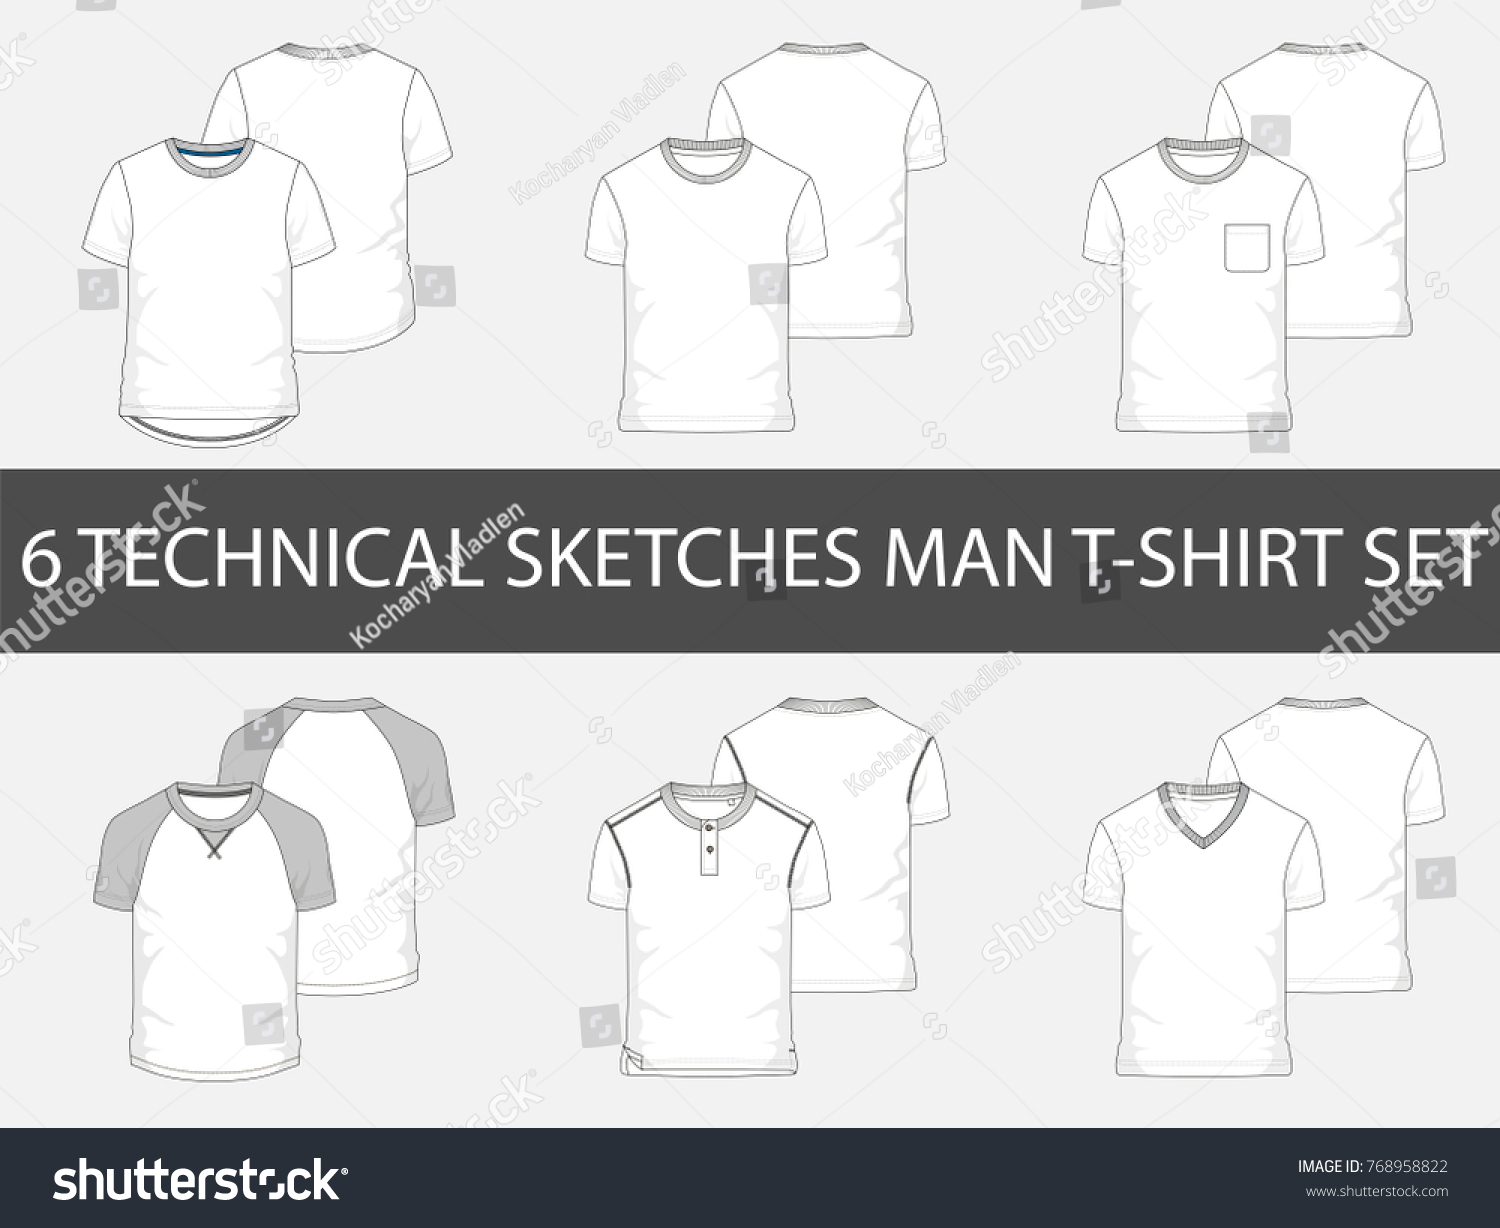 6 Fashion Technical Sketches Men Tshirts Stock Vector (Royalty Free ...